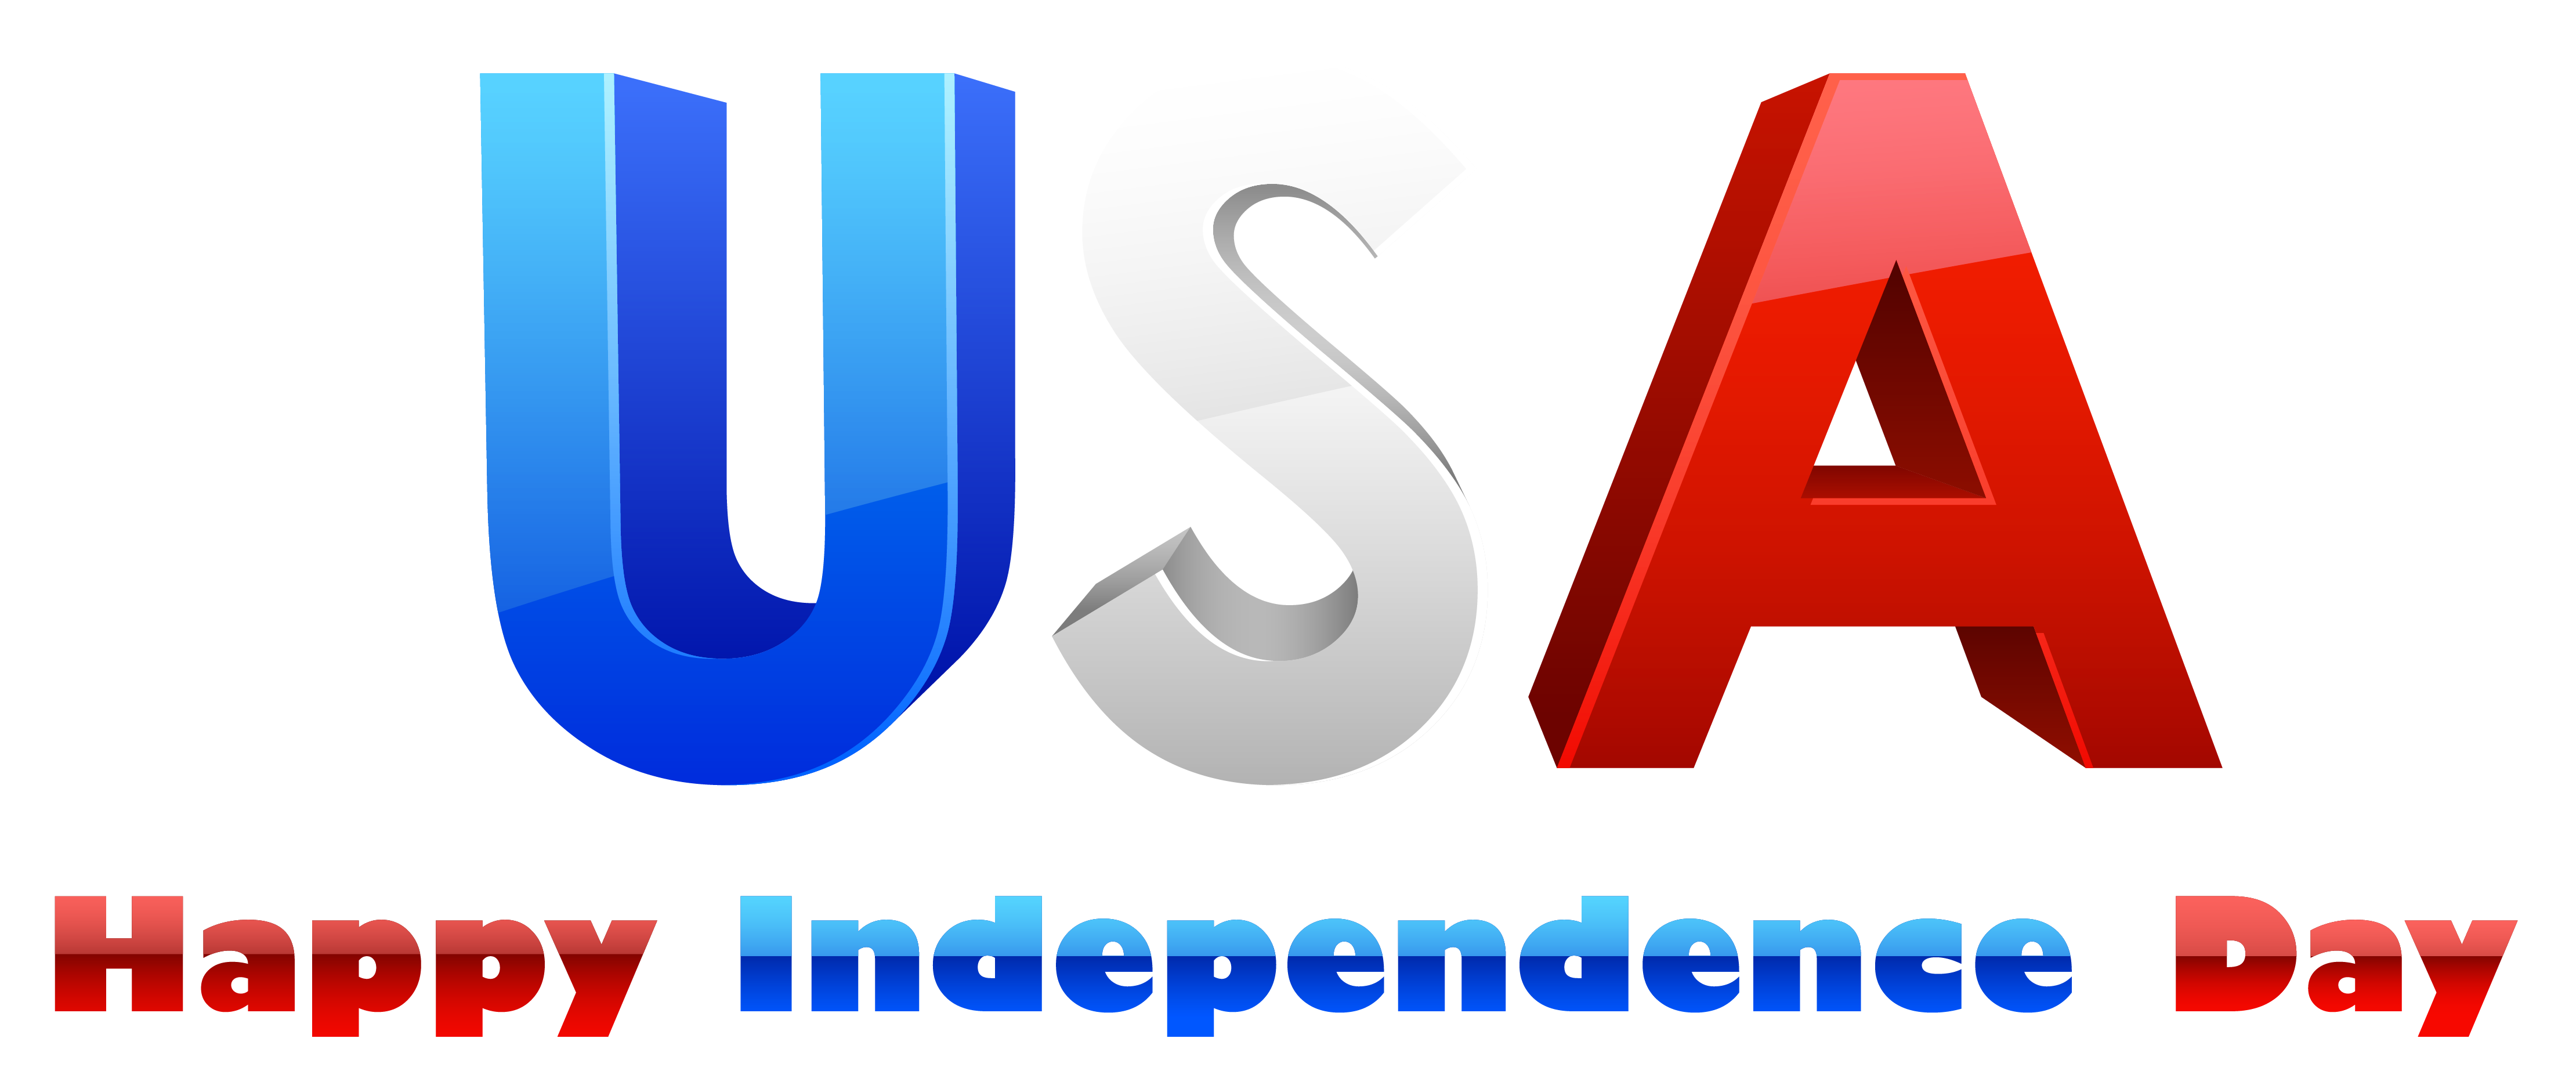 clipart on independence day - photo #33